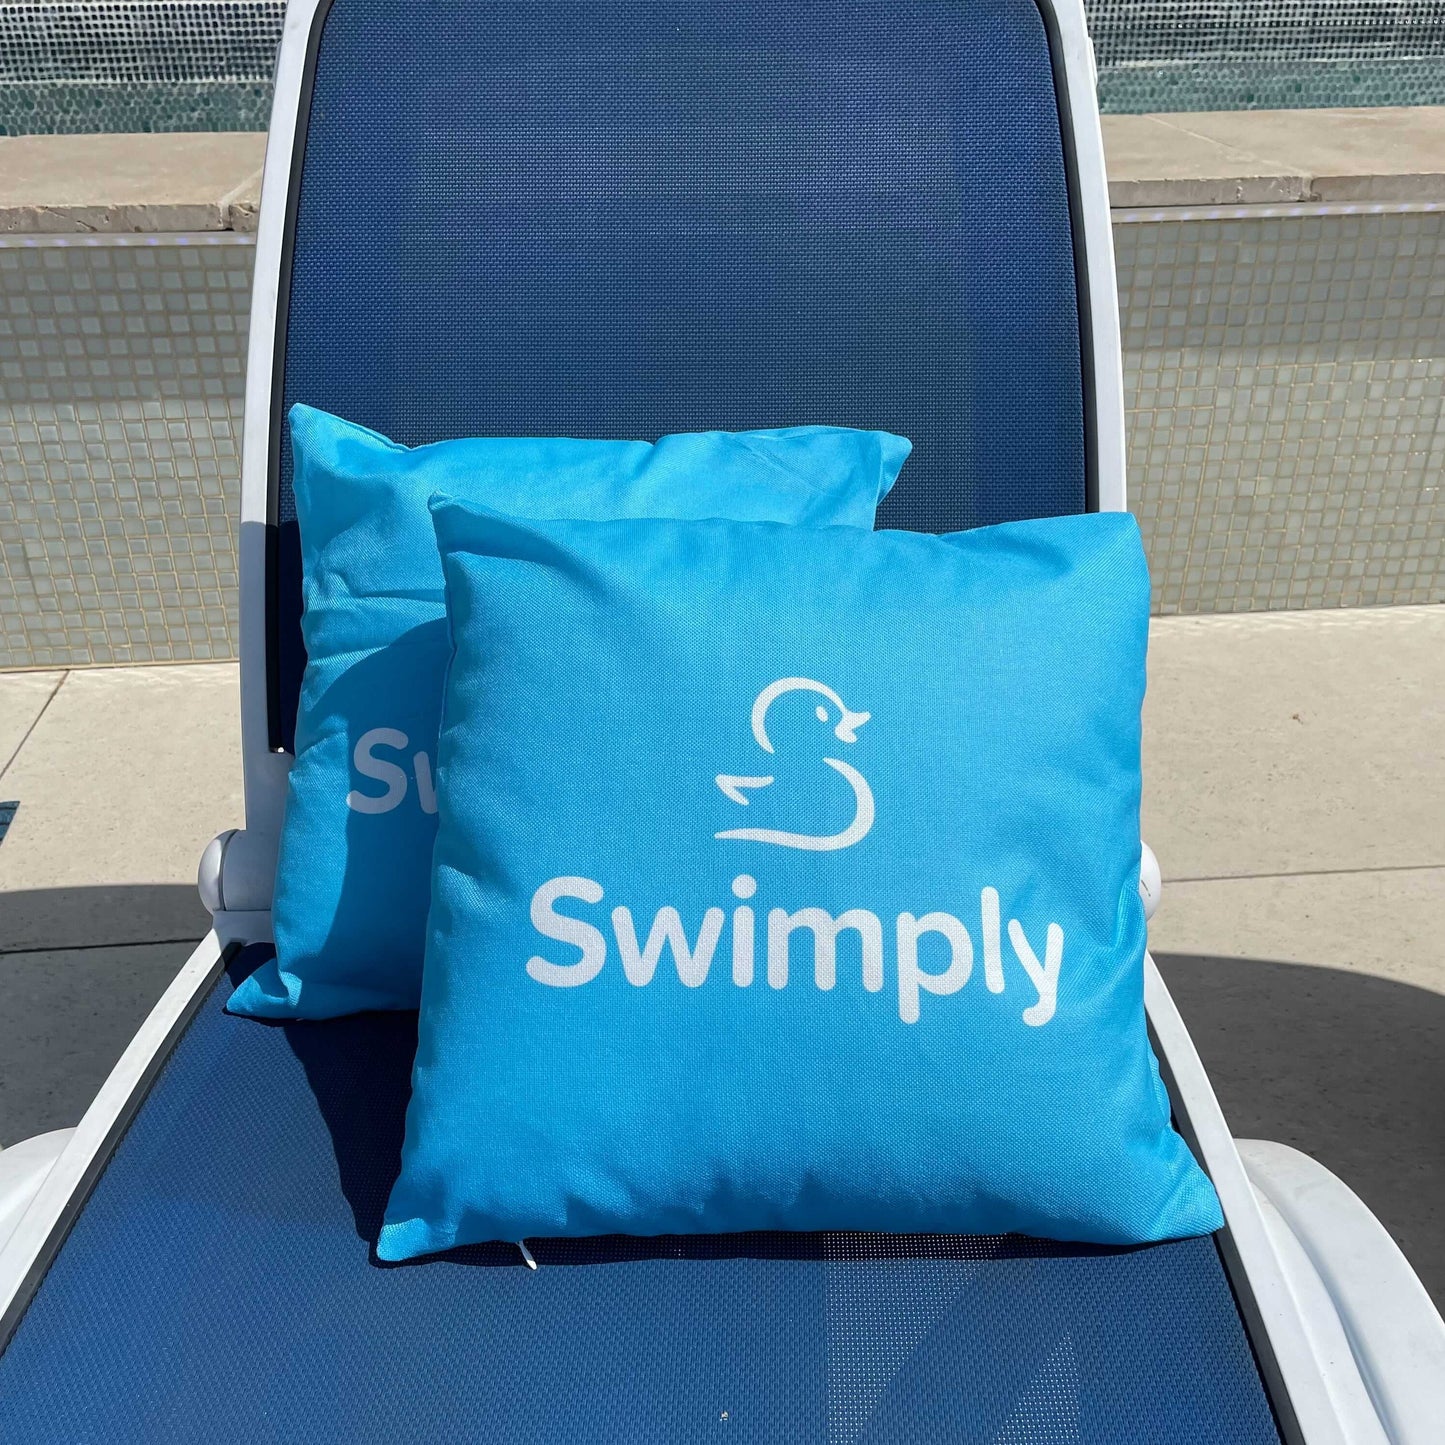 Swimply Poolside Pillows!